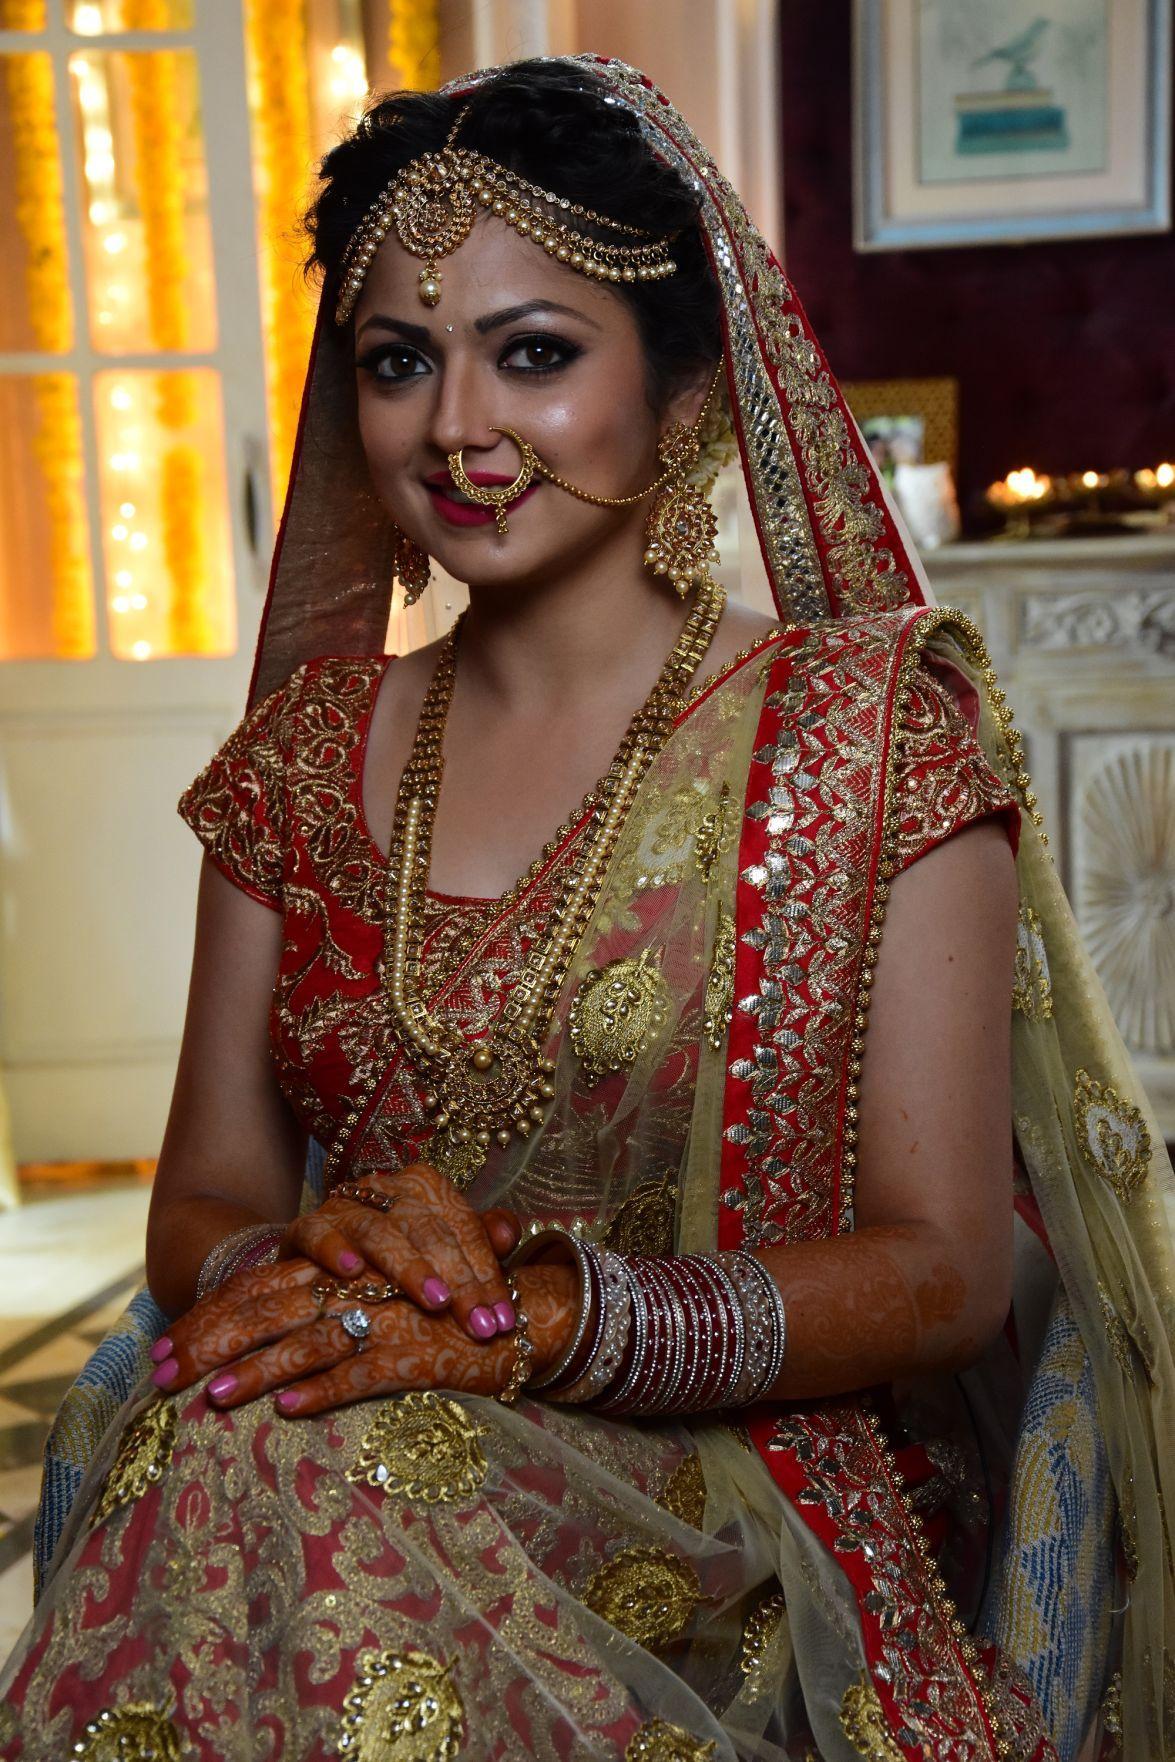 HD Wallpapers For Drashti Dhami With Dulhan Dress - Wallpaper Cave